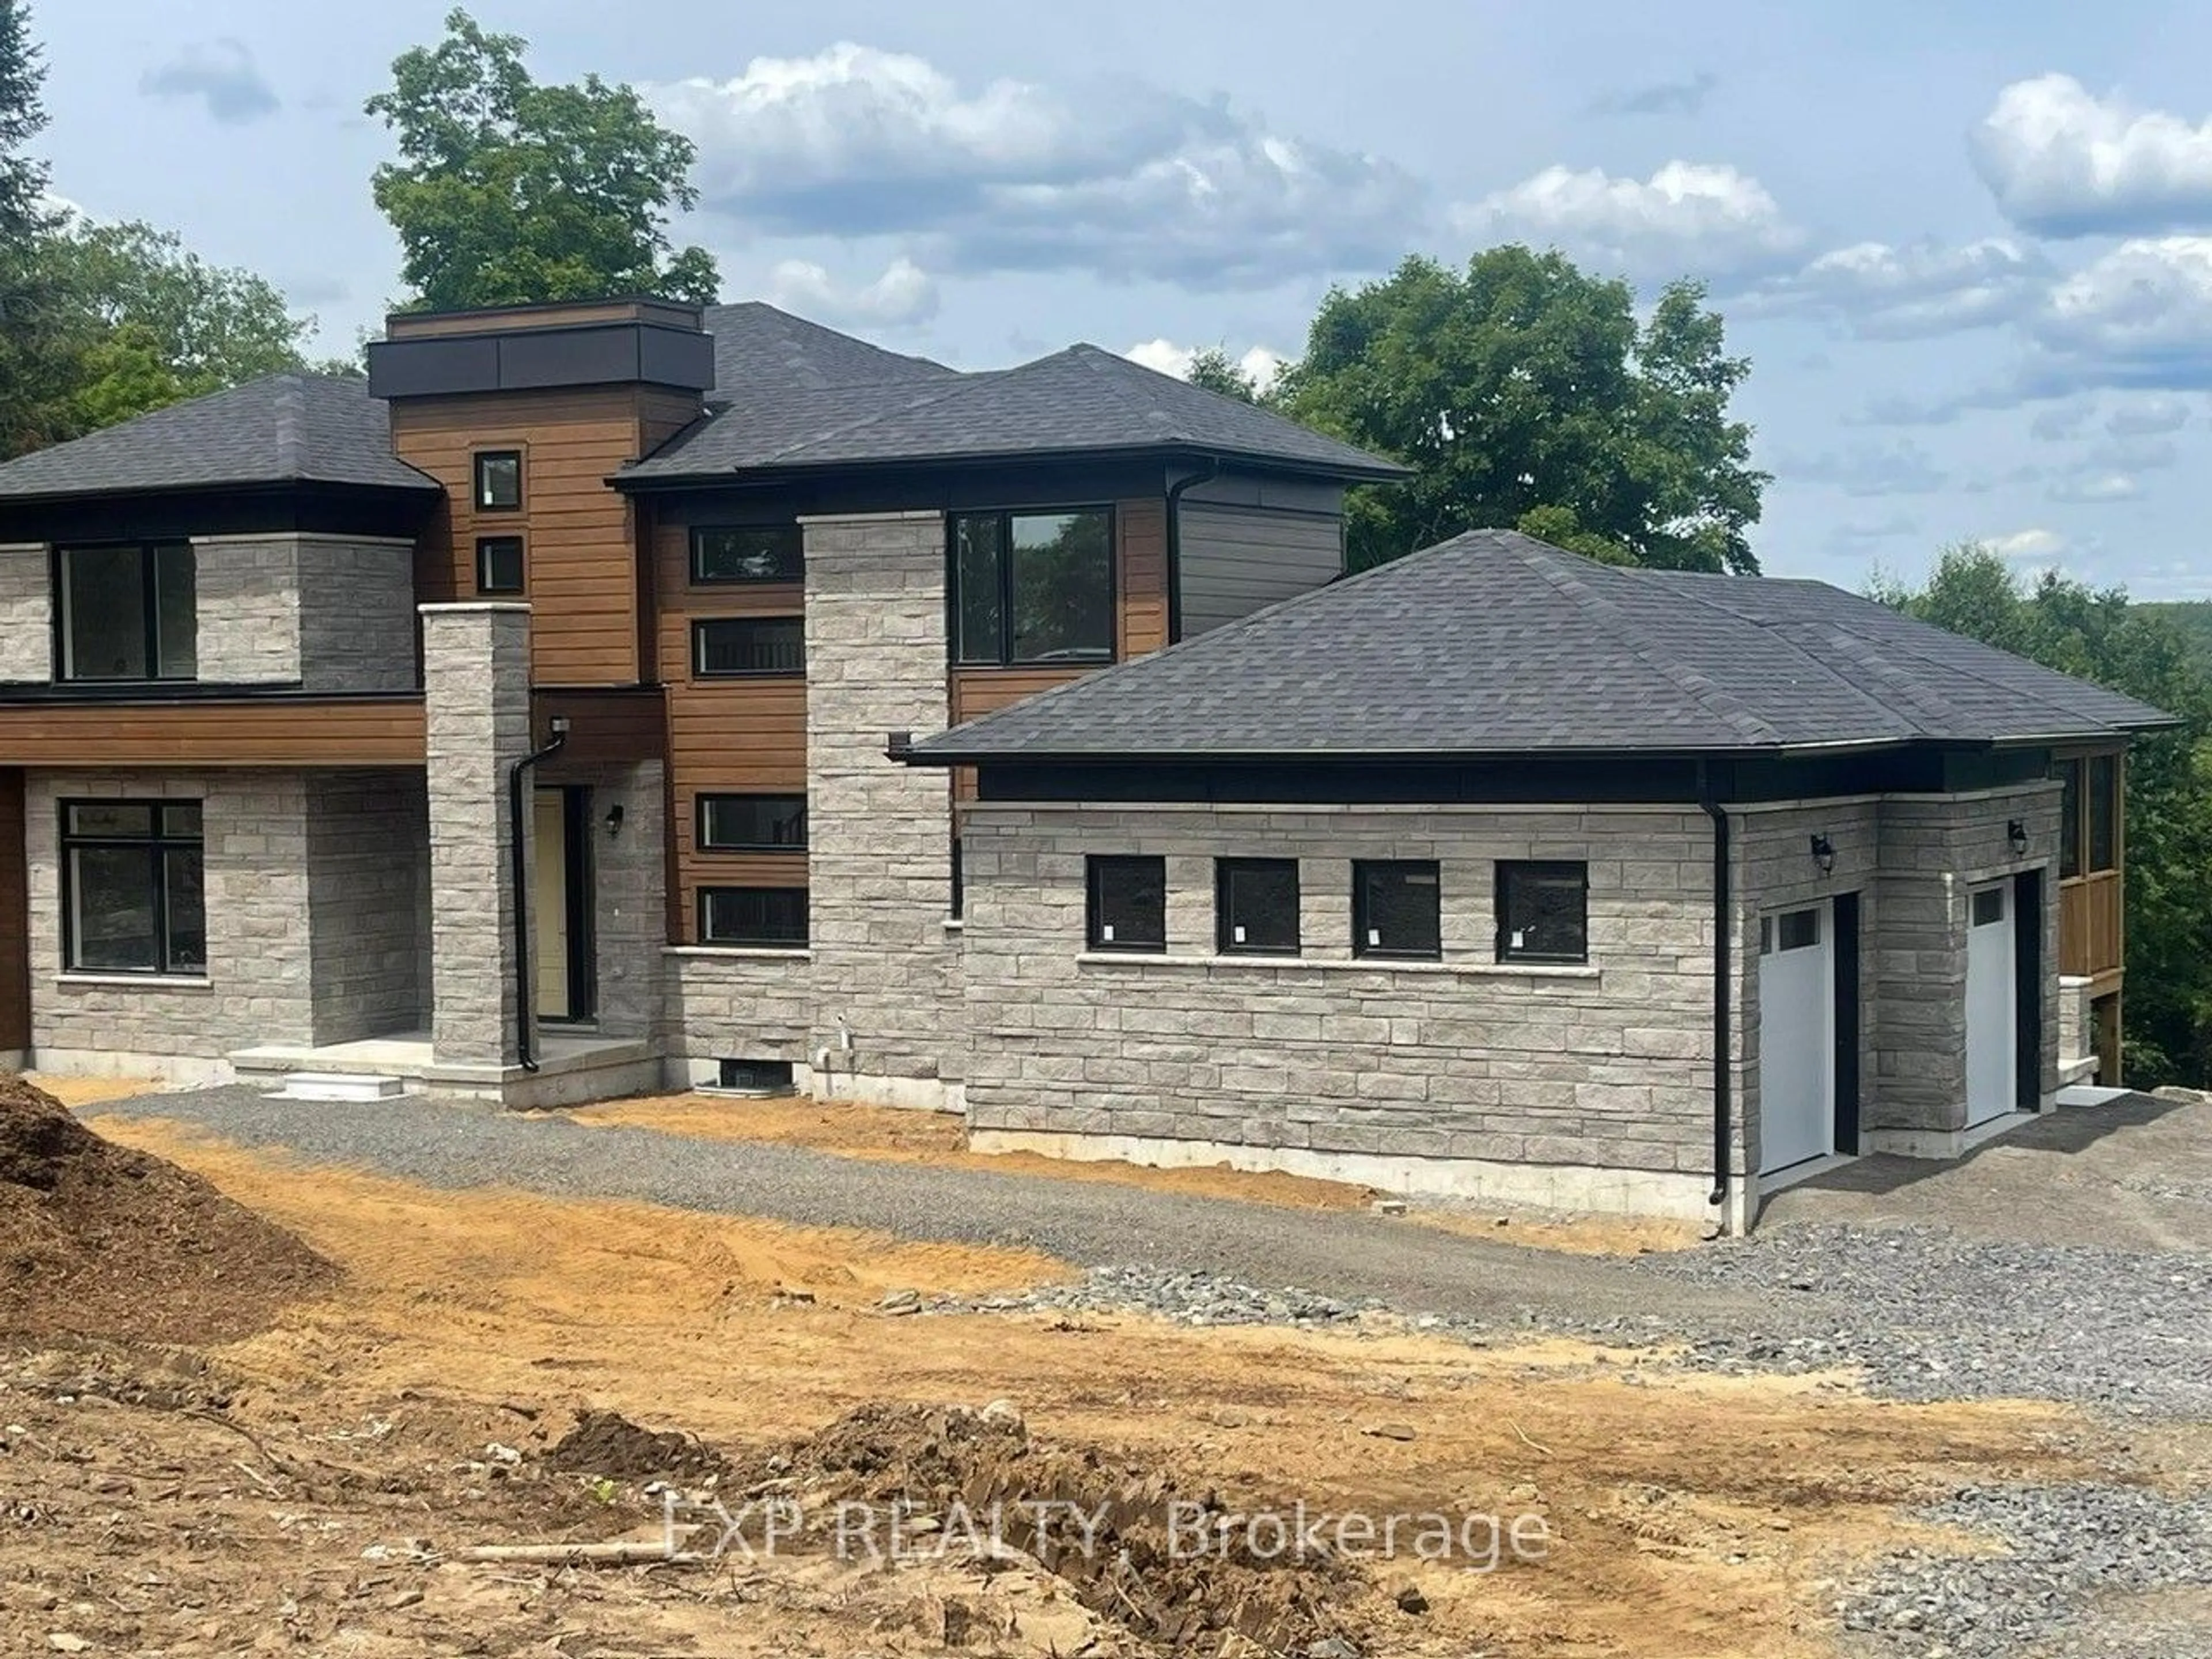 Home with brick exterior material for LOT 77 ECHO HILLS Rd, Lake of Bays Ontario P1H 0K1